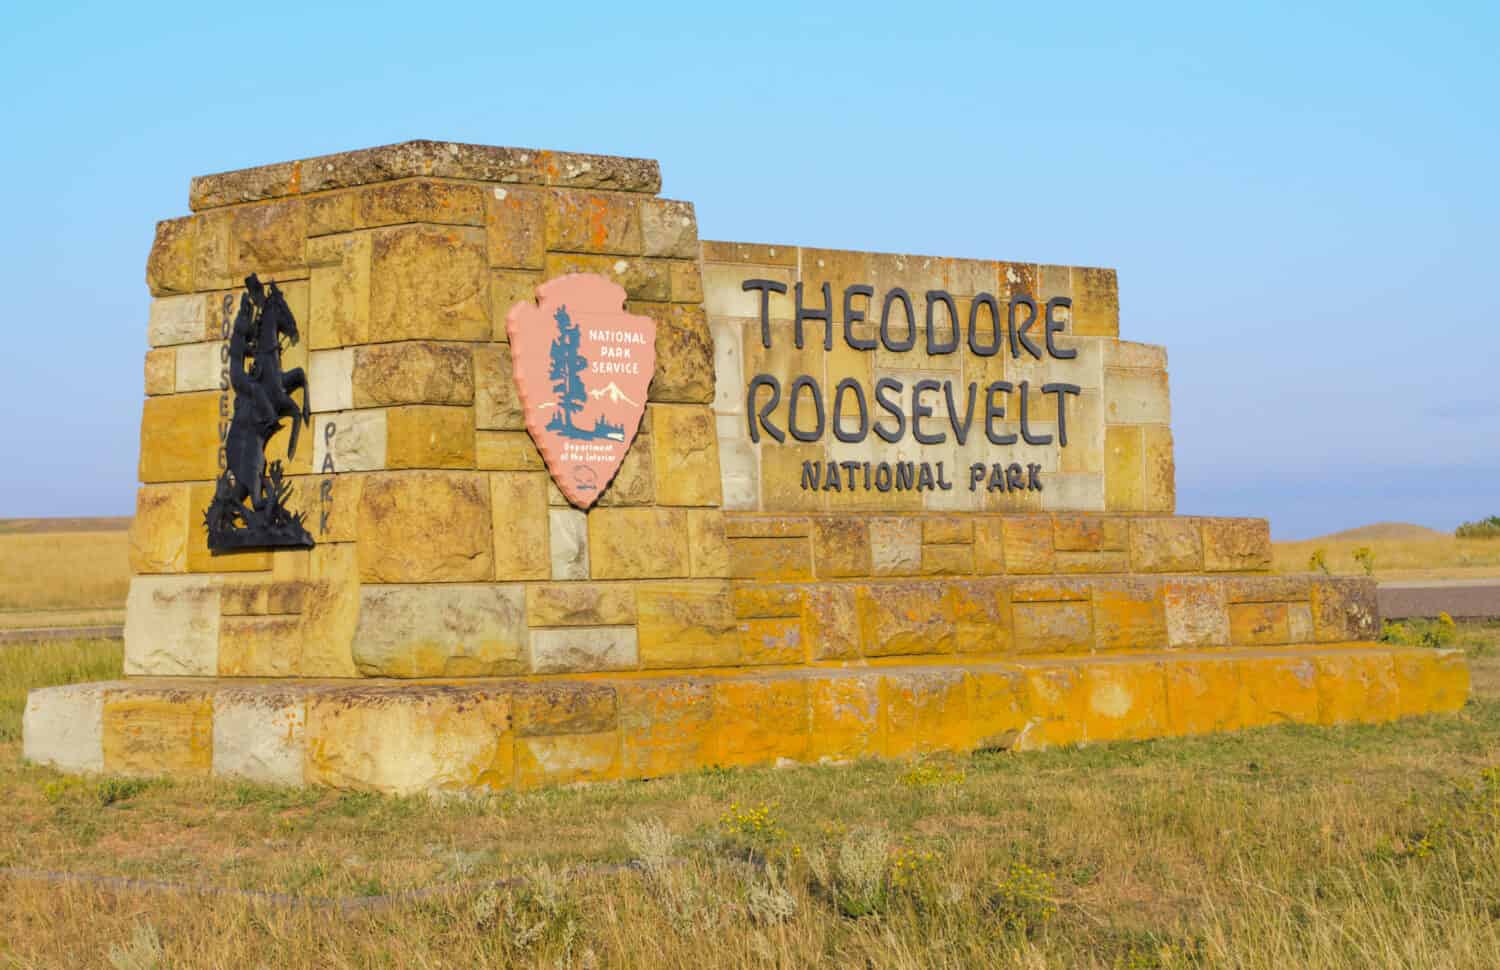 Theodore Roosevelt National Park sign